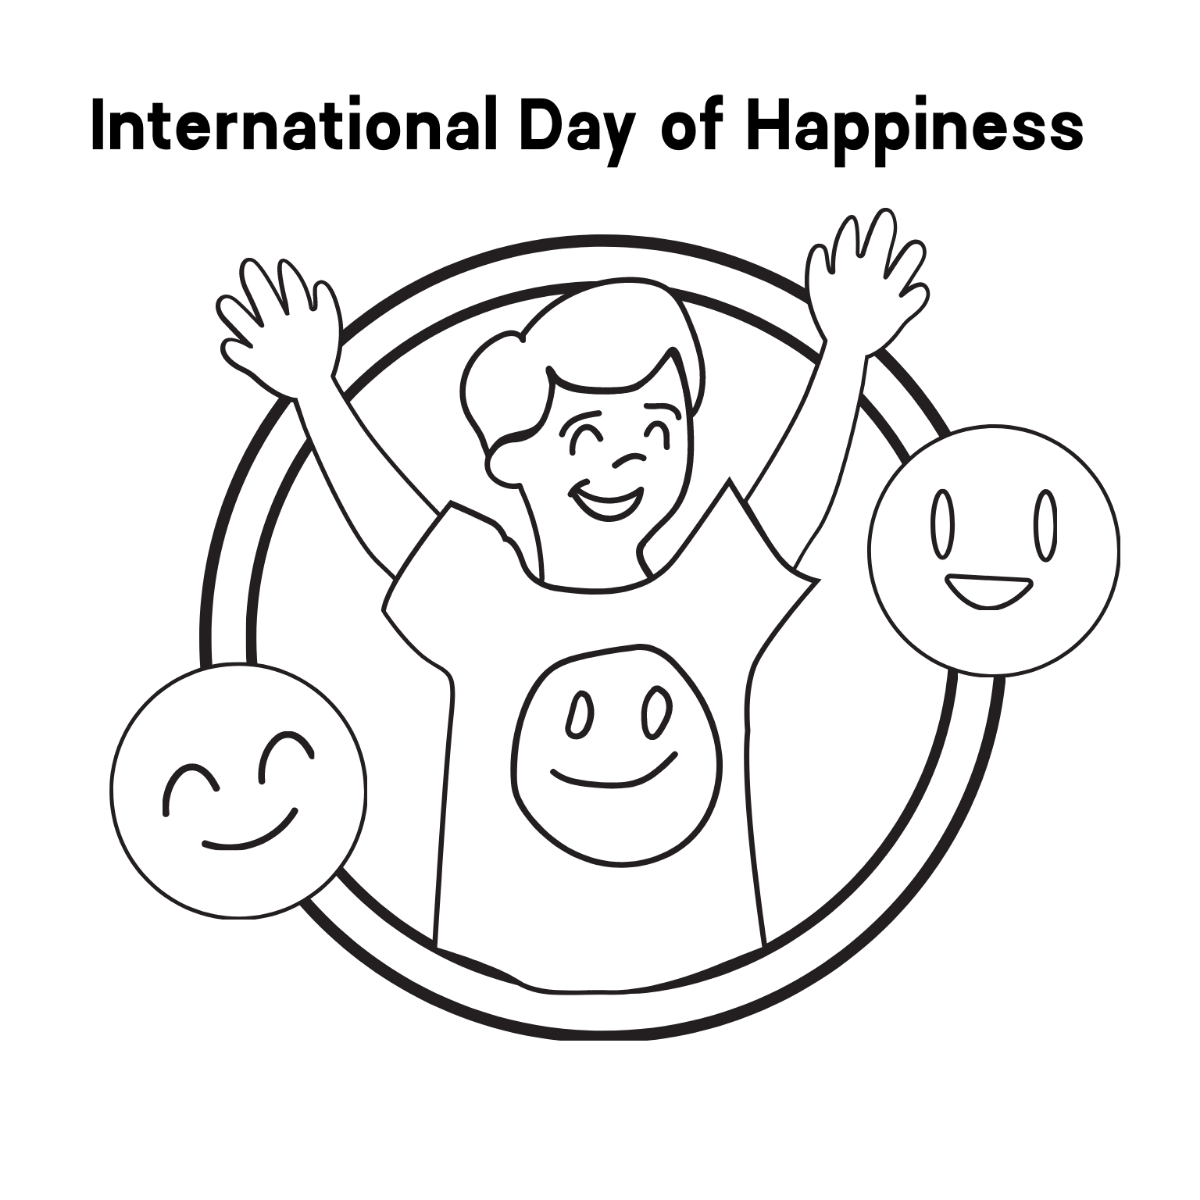 International Day of Happiness Drawing Background in EPS, Illustrator, JPG,  PNG, SVG, PSD - Download | Template.net